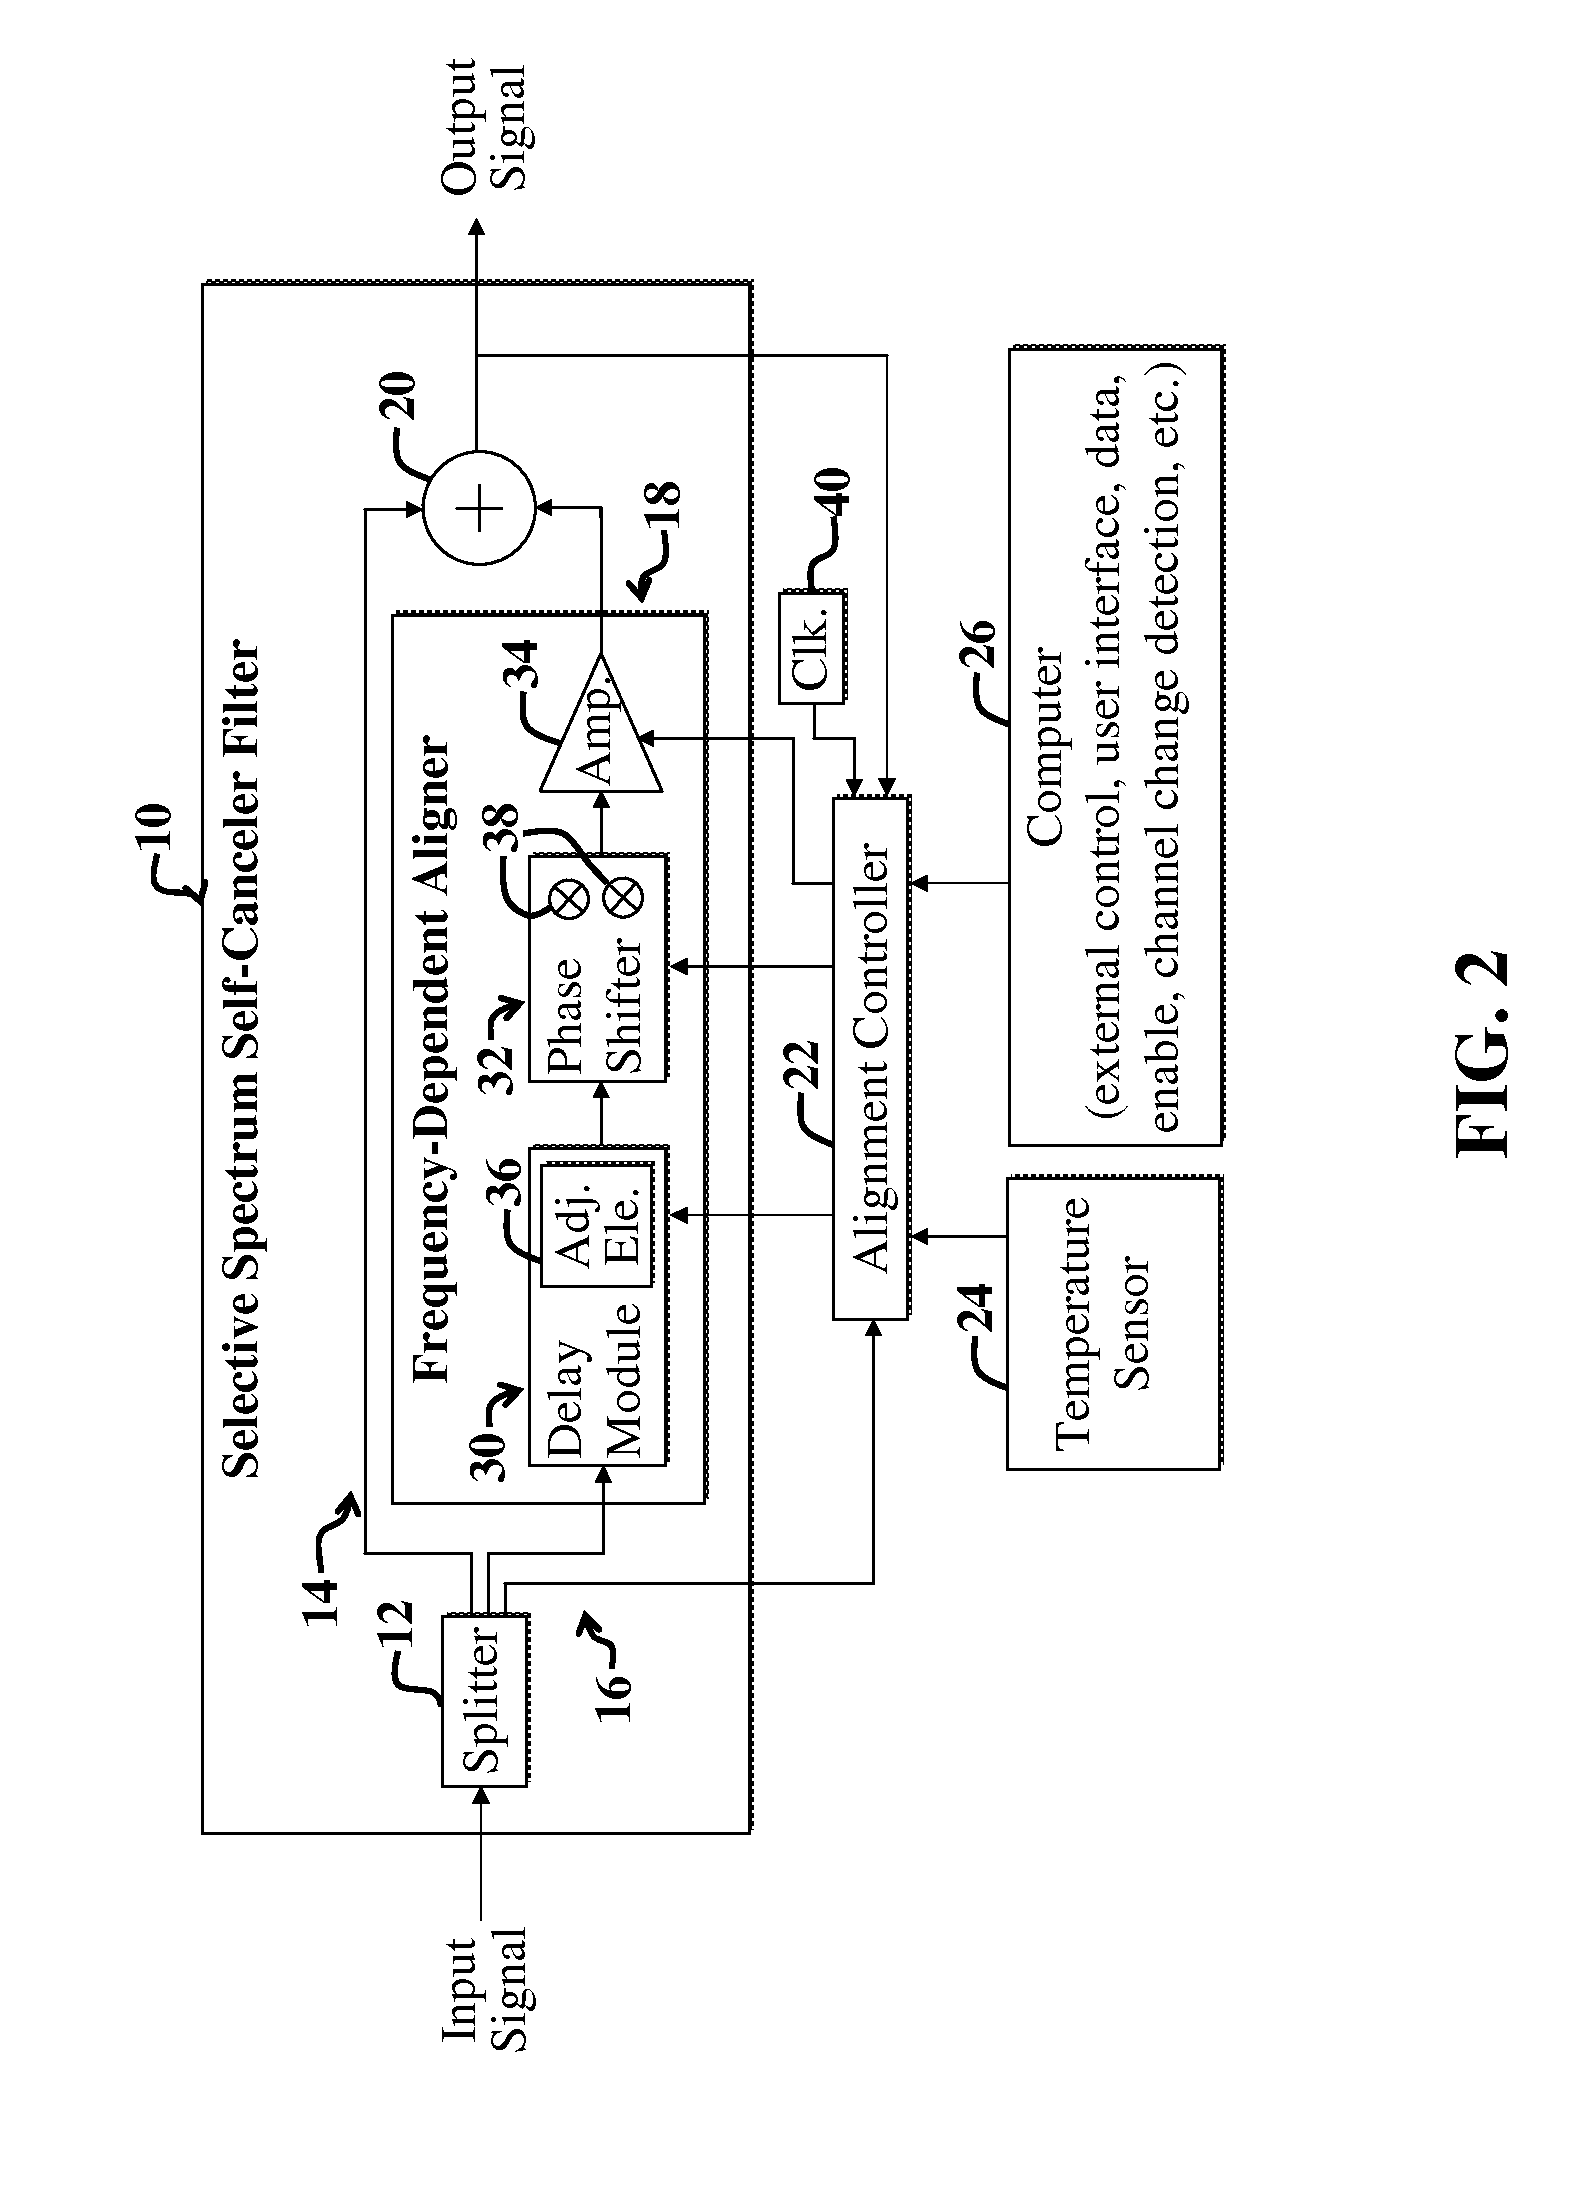 Filter shaping using a signal cancellation function